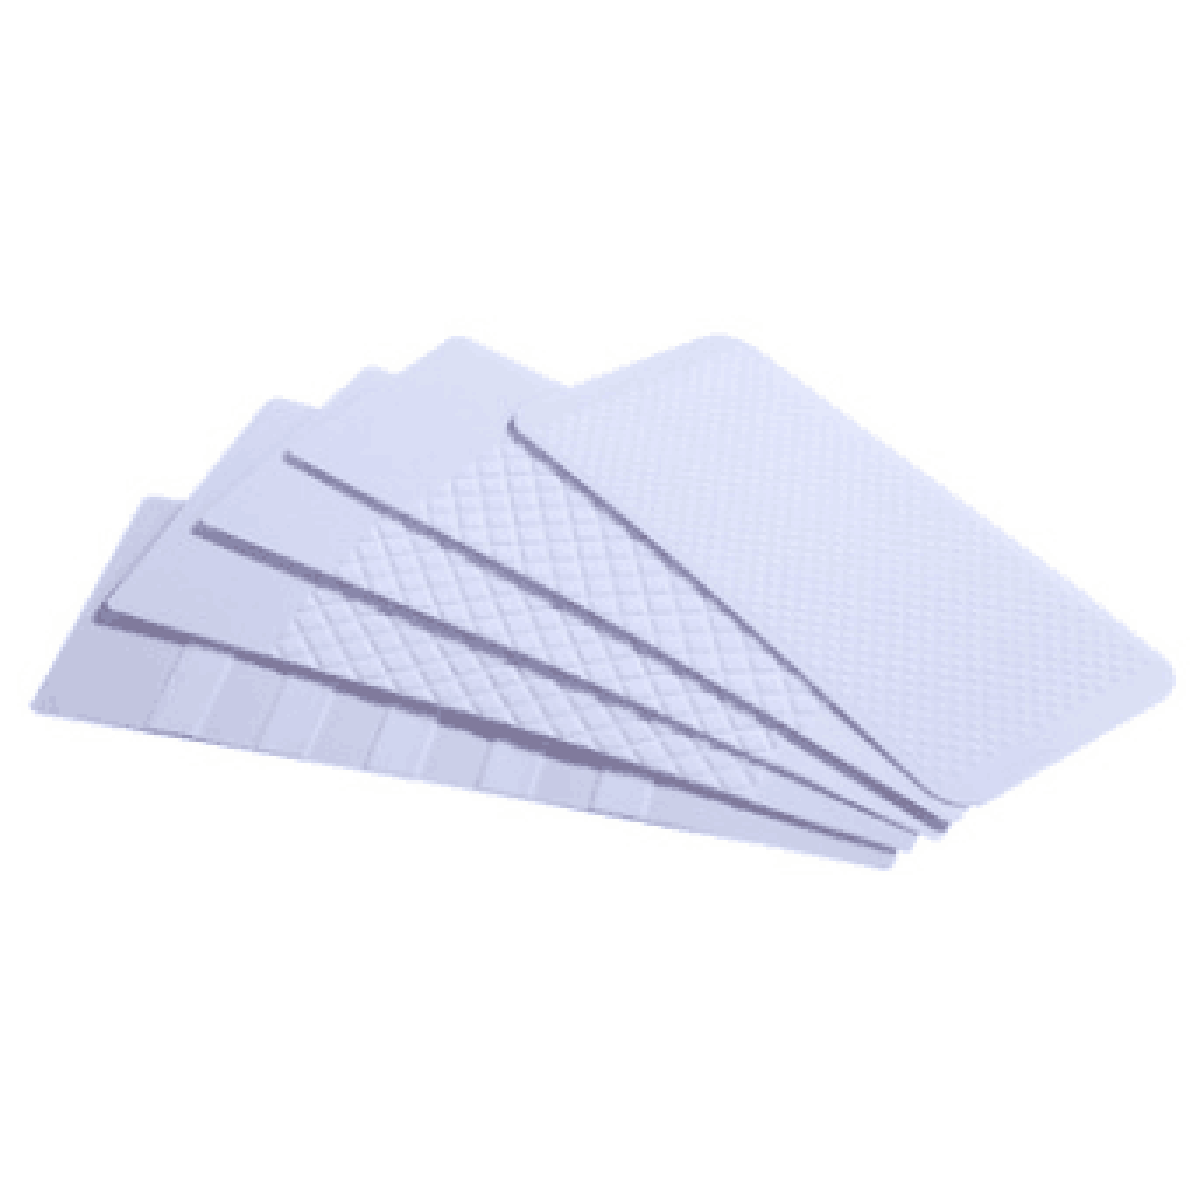 10pcs machine ATM financial equipment cleaning card 85x185mm - Click Image to Close